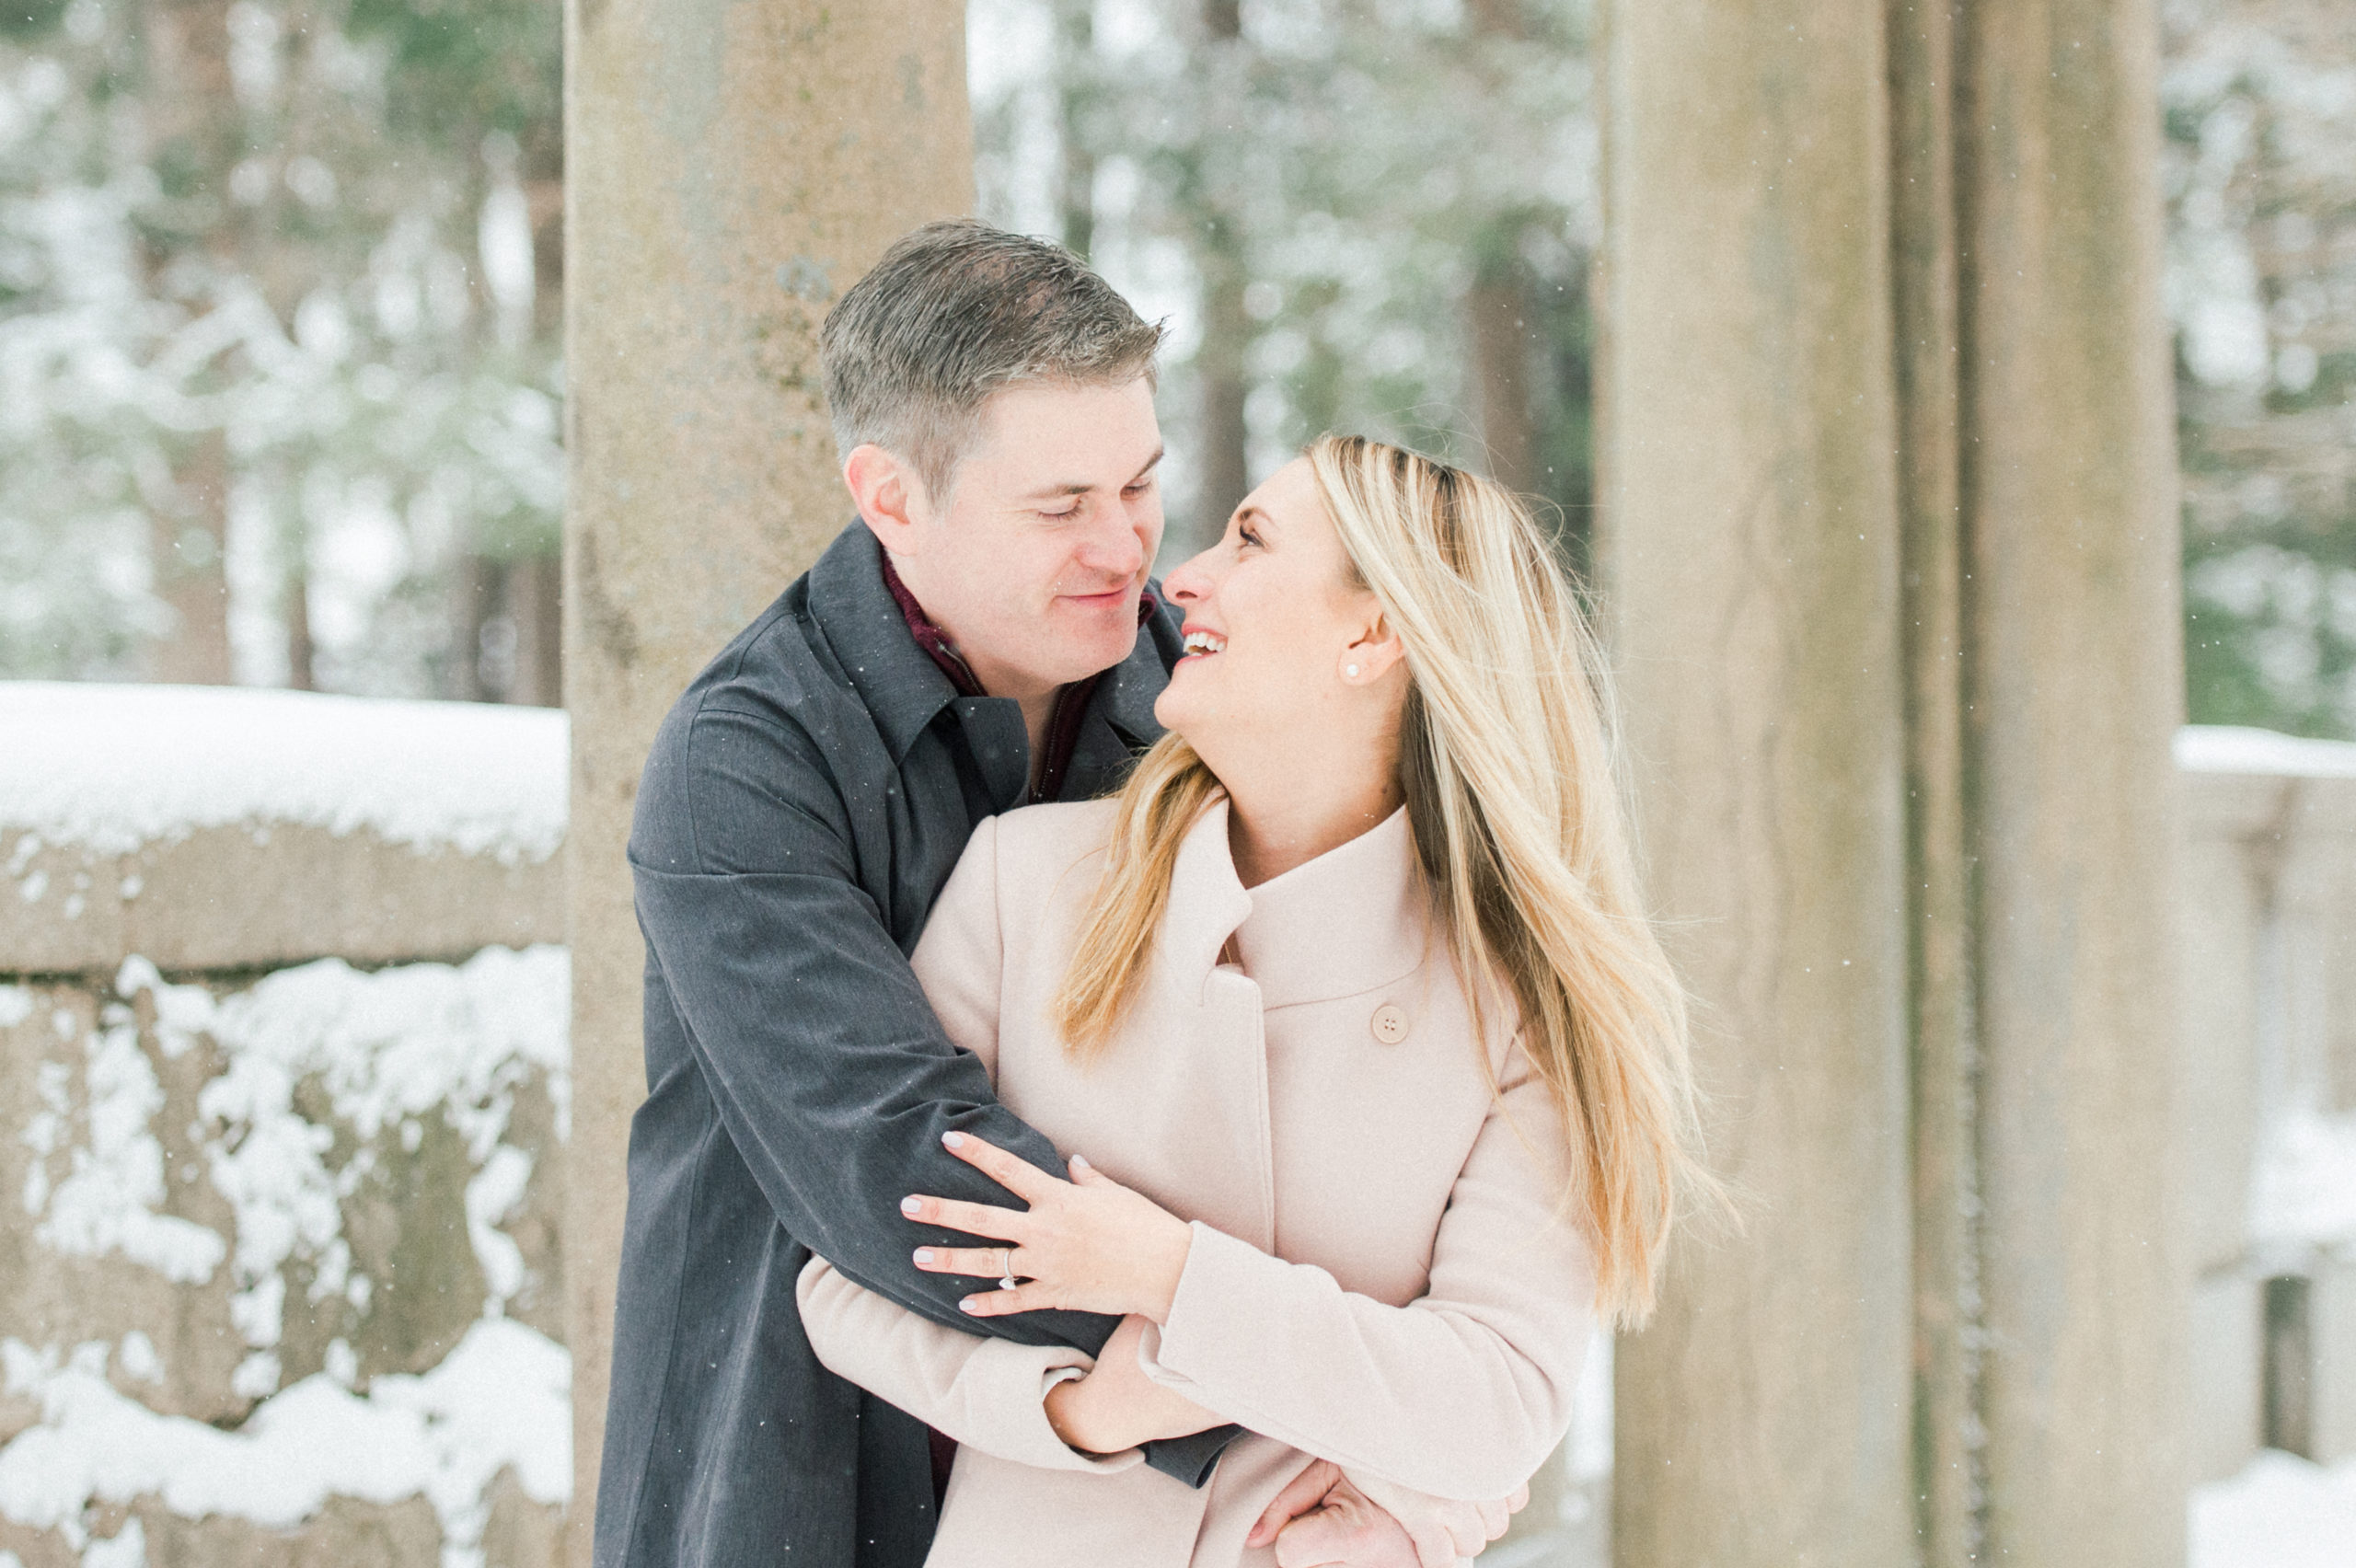 winter engagement session tips at larz anderson park engagement session